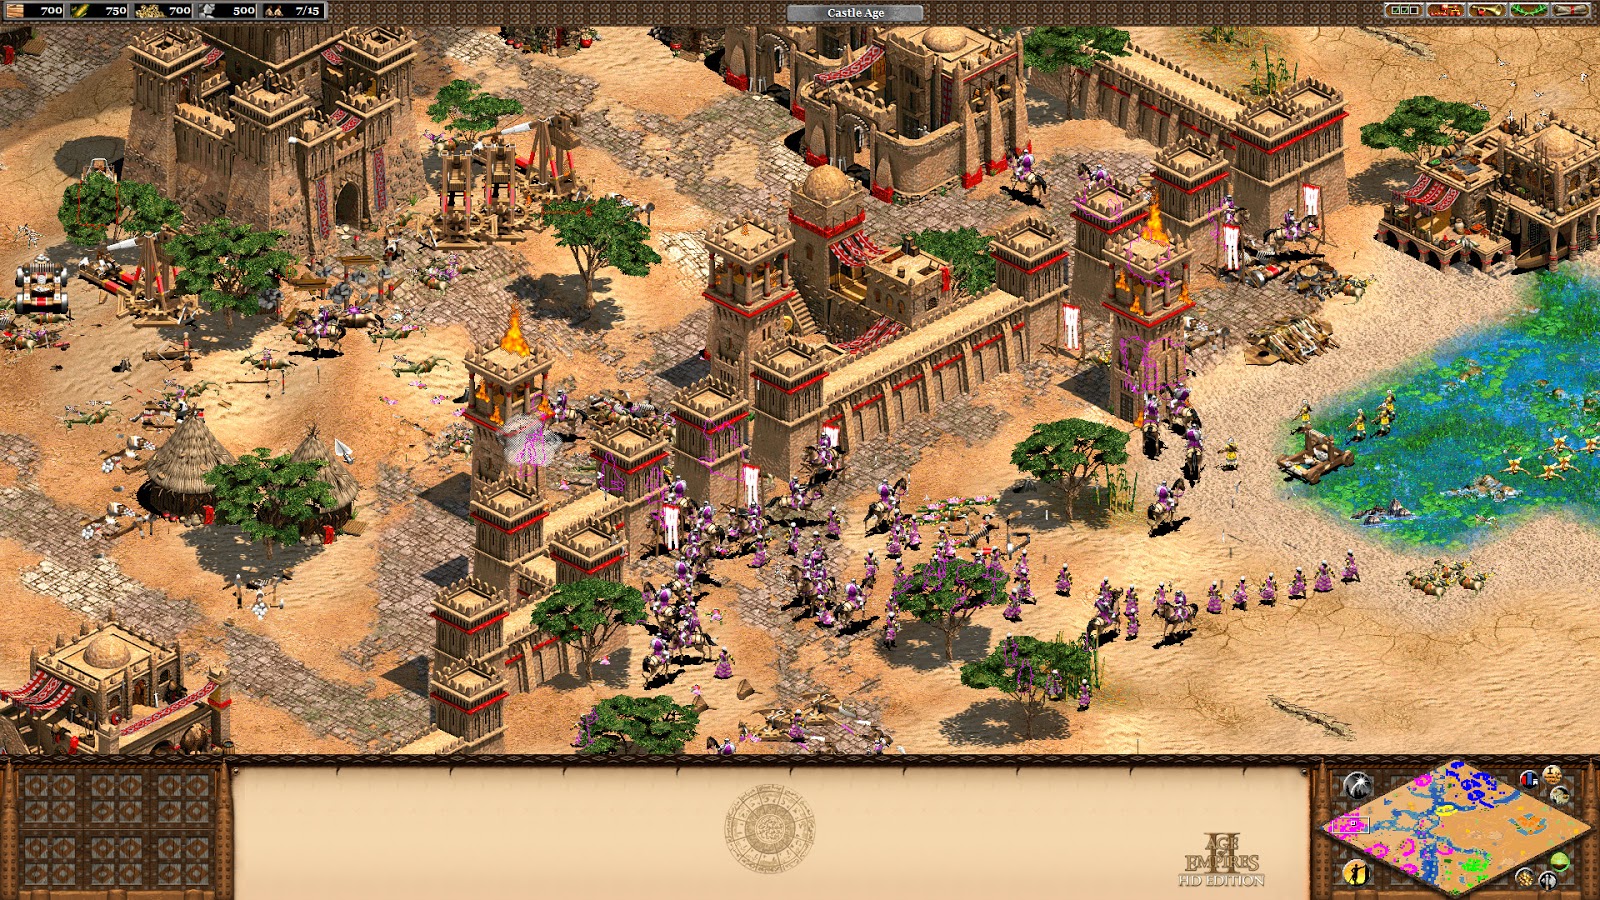 age of empires ii hd edition wiki